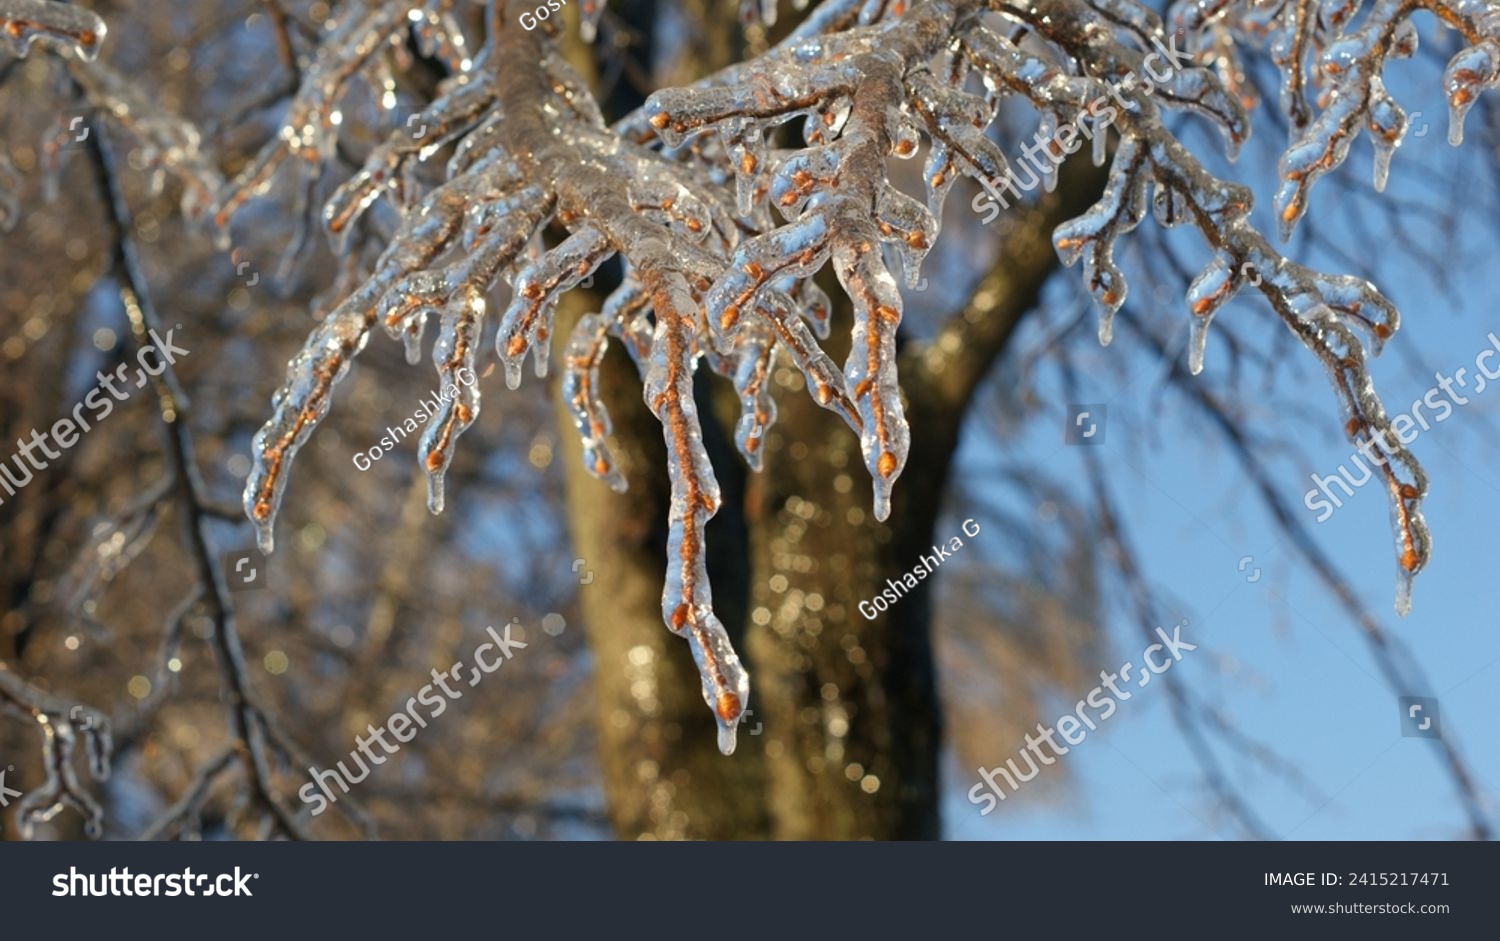 The intricate details of tree branches covered in ice. The branches appear wet or glossy, likely due to melting ice.  #2415217471